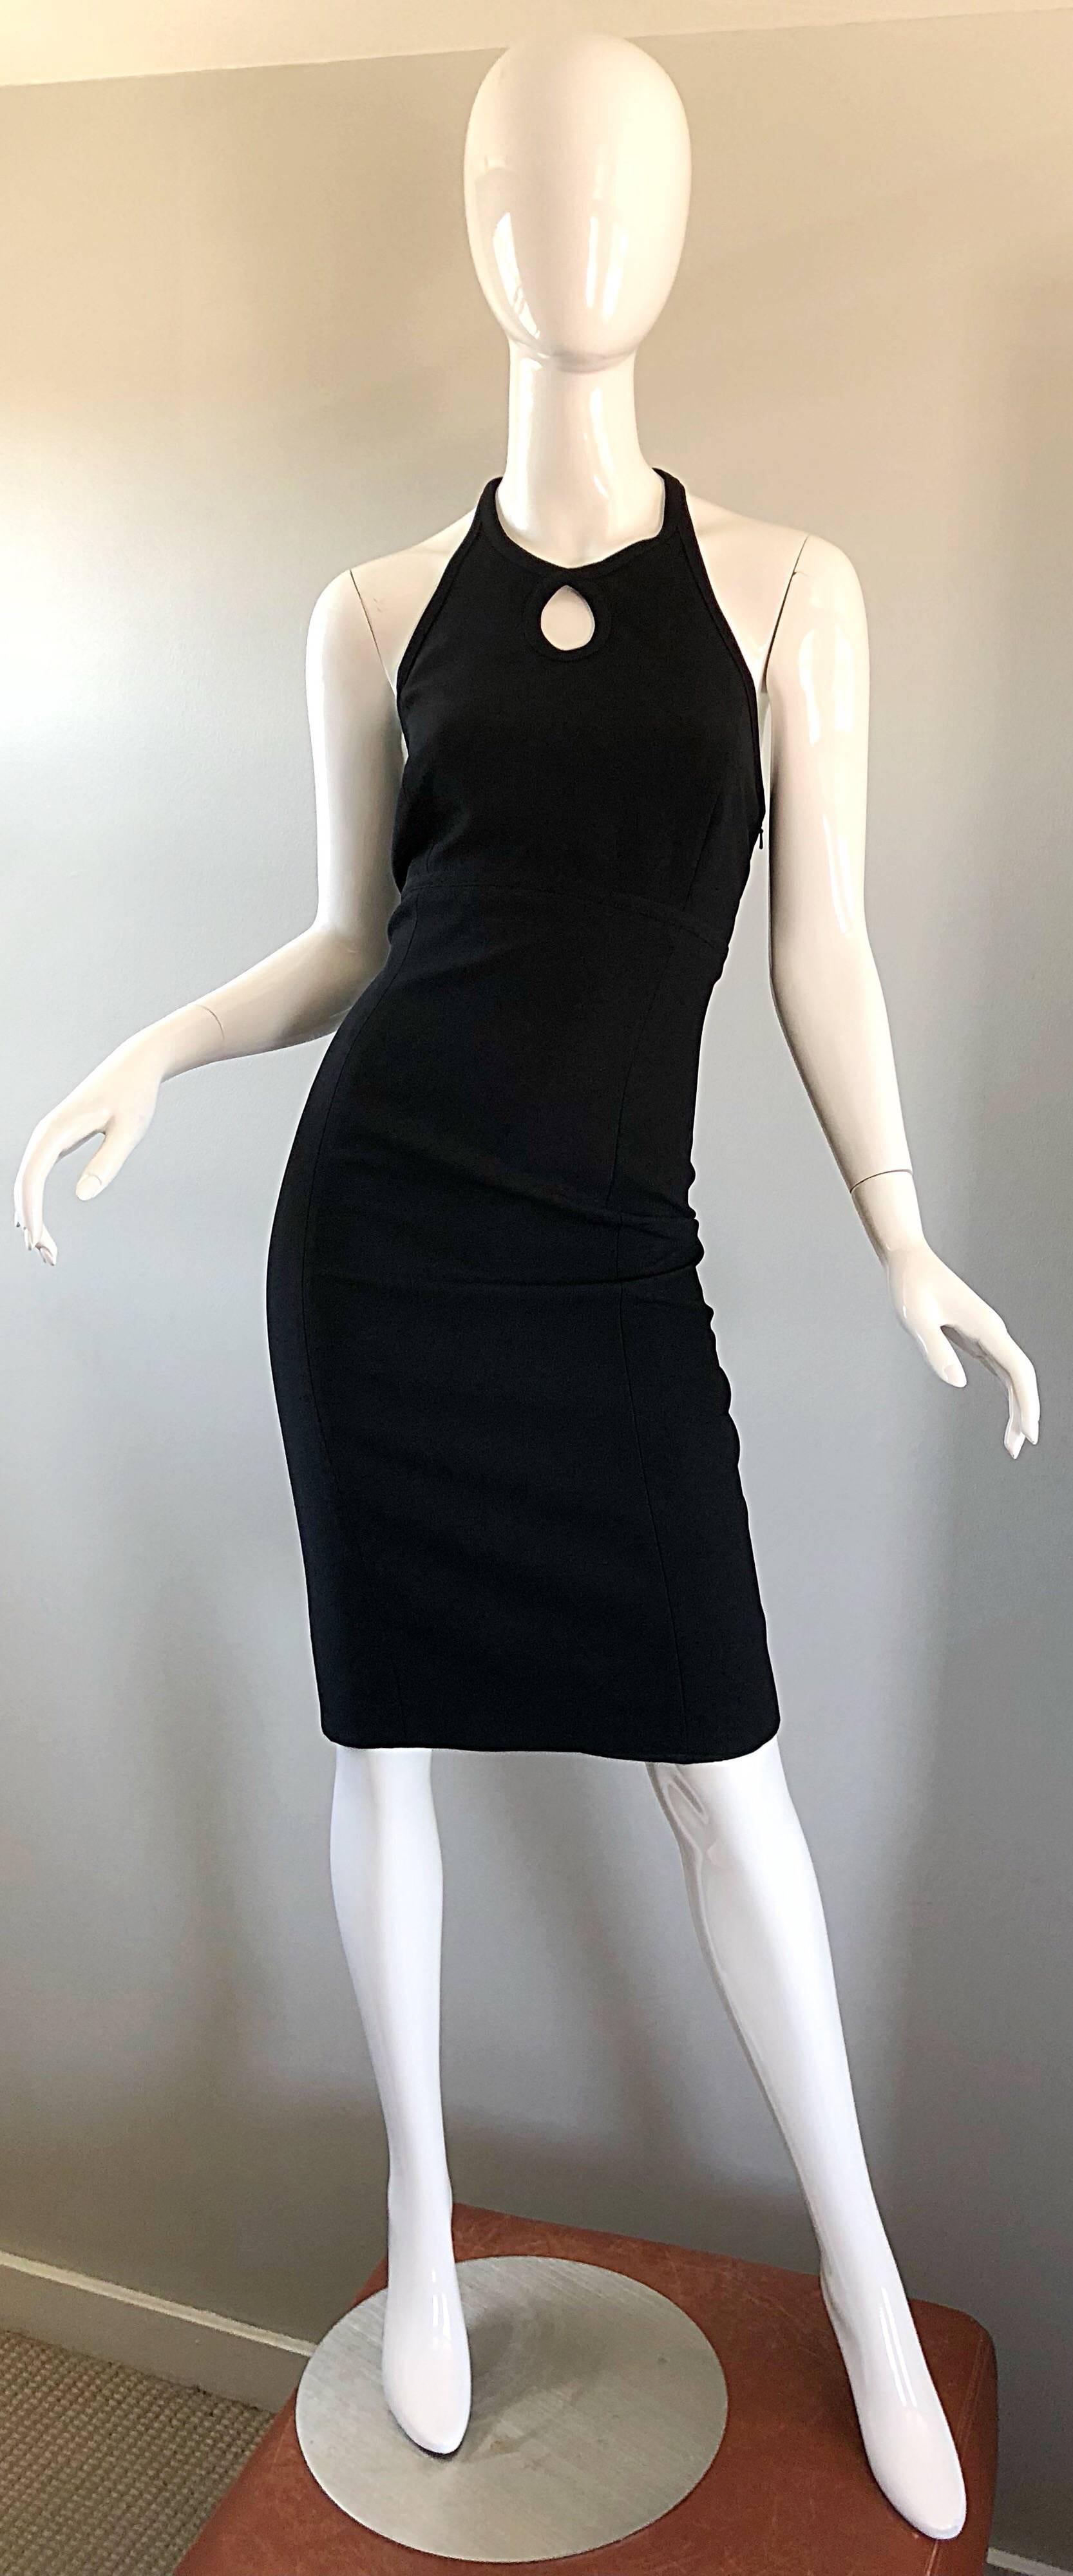 This perfect vintage little black dress was designed by none other than BILL BLASS! Features a flattering fit that has some stretch. Keyhole detail above the bust. Racer back design reveals just the right amount of back. Hidden zipper up the back